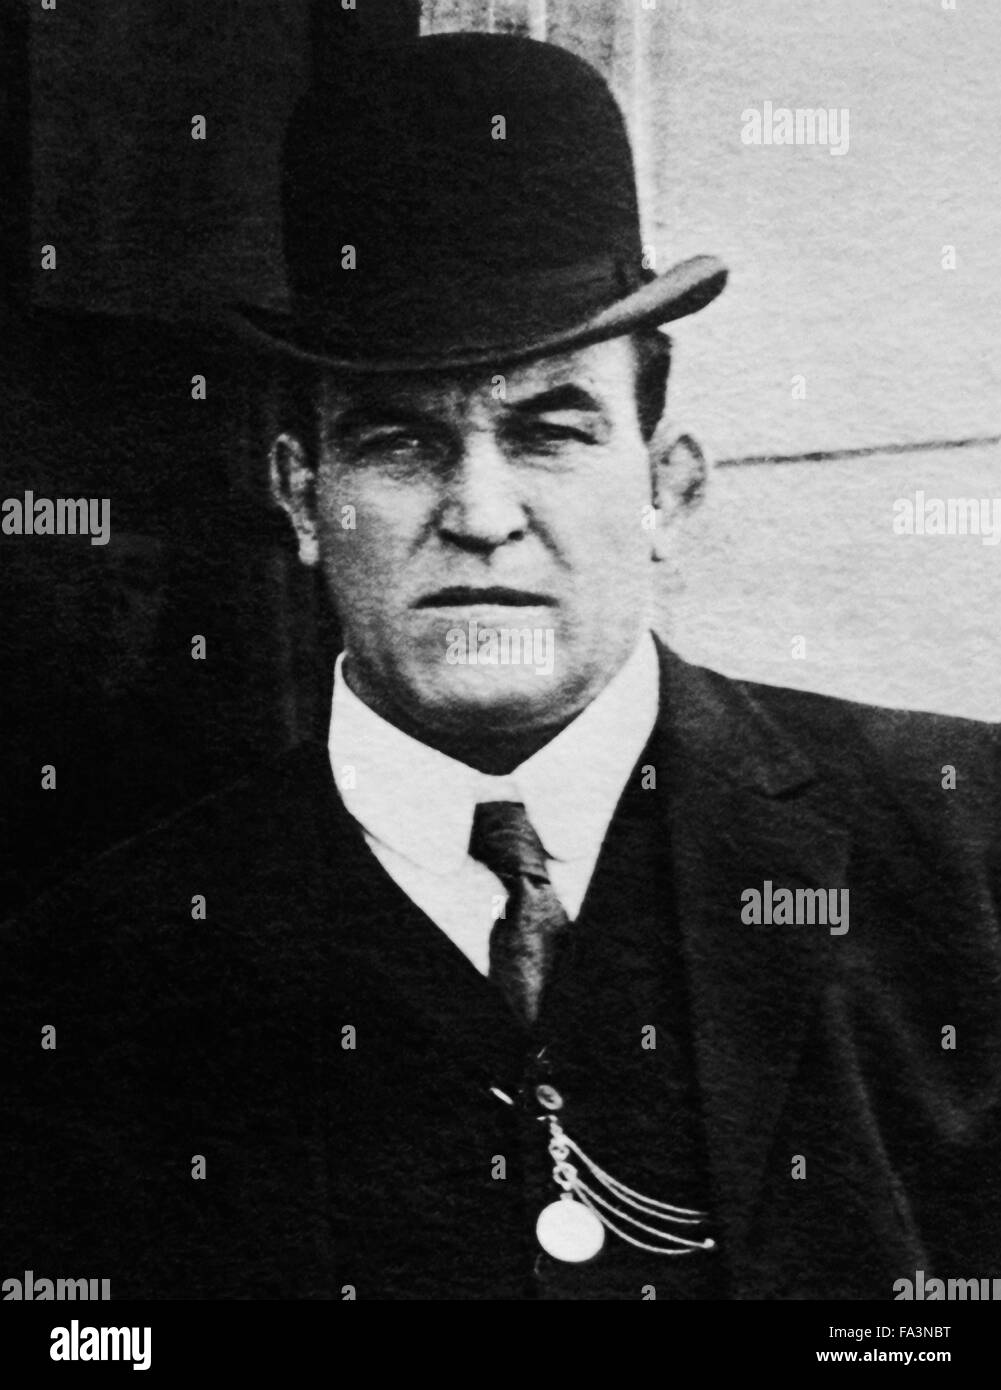 Vintage photo of American boxer James J Jeffries - World Heavyweight Champion from 1899 to 1905. Jeffries (1875 - 1953), nicknamed 'The Boilermaker', won the world title by knocking out defending champion Bob Fitzsimmons on June 9 1899 in Brooklyn, New York, and defended the crown several times before retiring undefeated in 1905. He made a comeback in the so-called 'Fight of the Century' against Jack Johnson, the first black World Heavyweight Champion, at Reno, Nevada, on July 4 1910, but was soundly beaten and the bout was stopped in the 15th round. Stock Photo